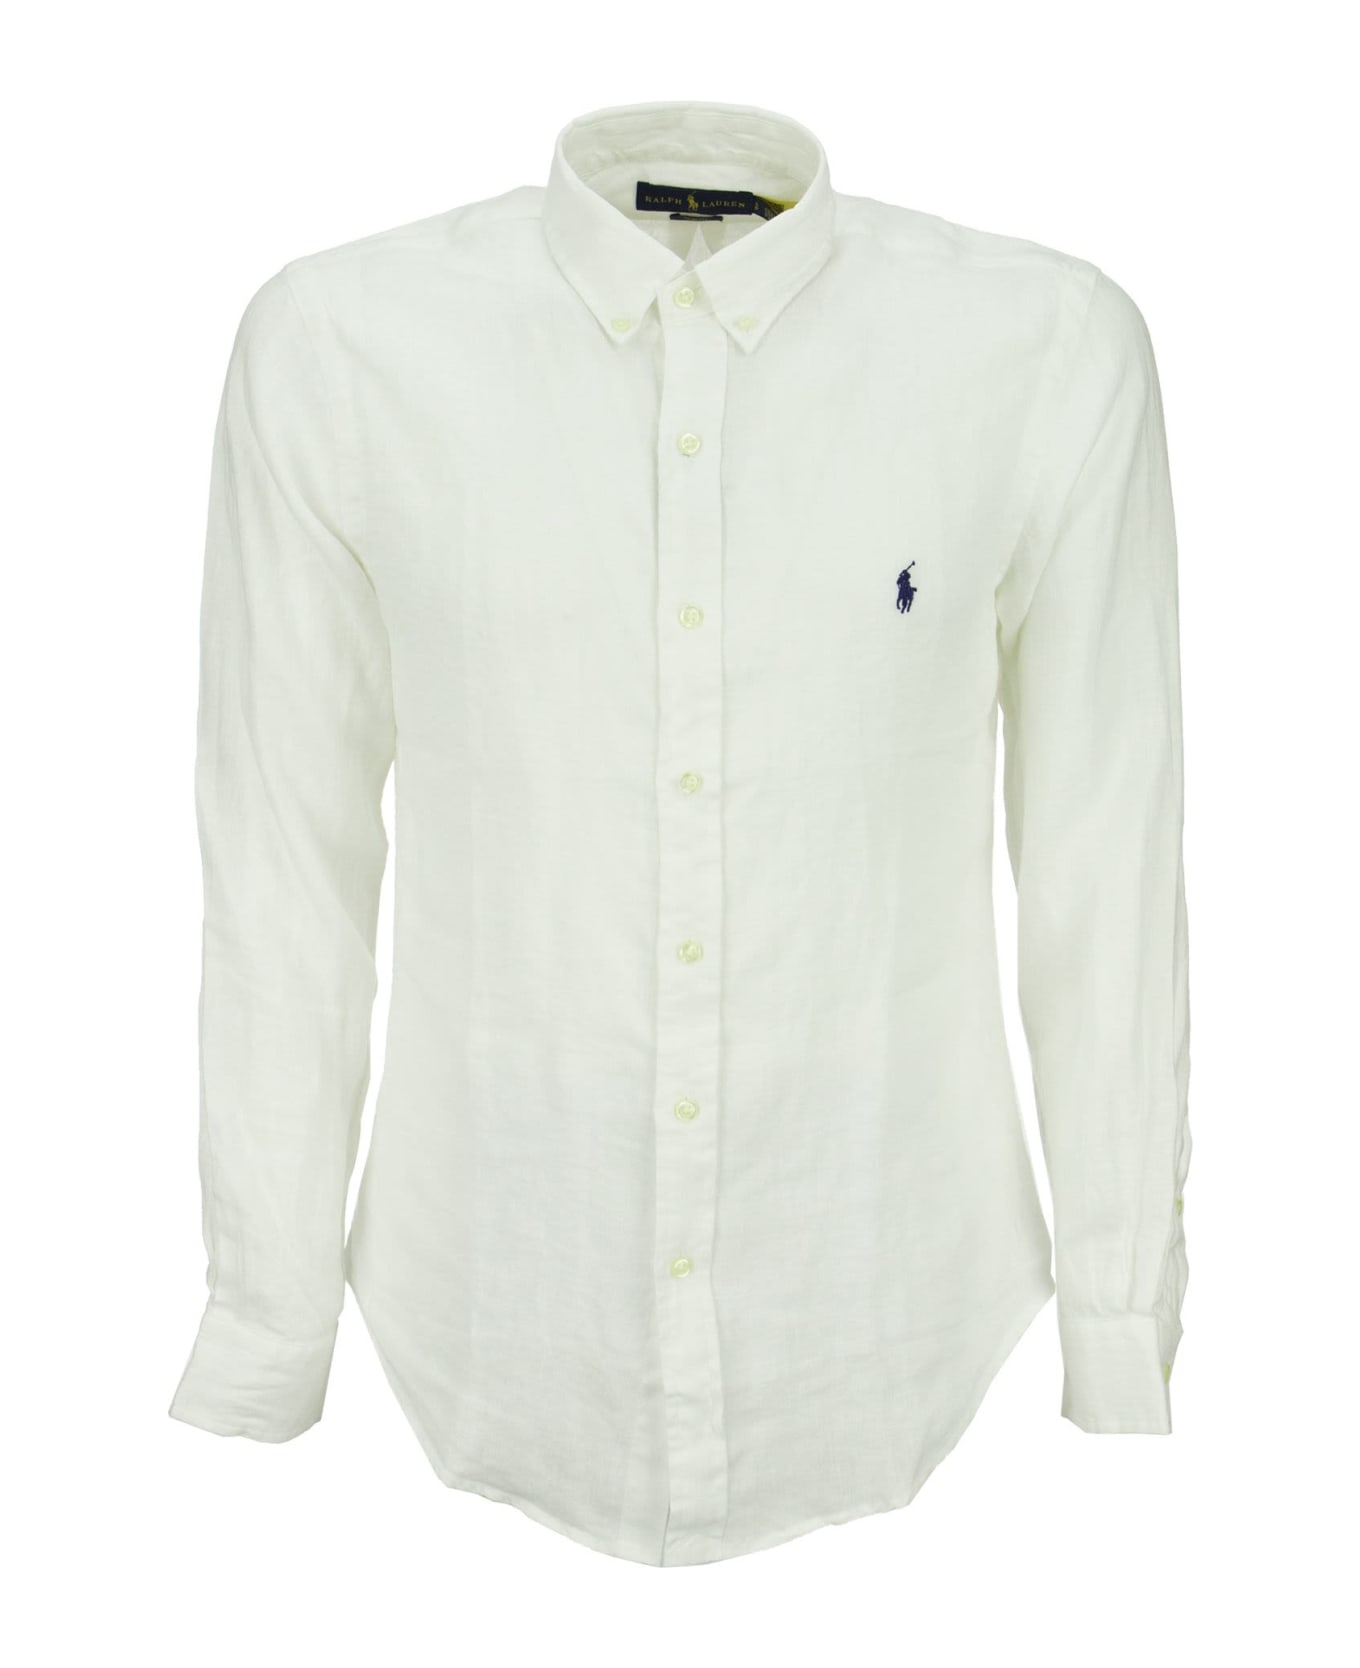 Polo Ralph Lauren White Slim Fit Linen Shirt With Blue Pony - Bianco